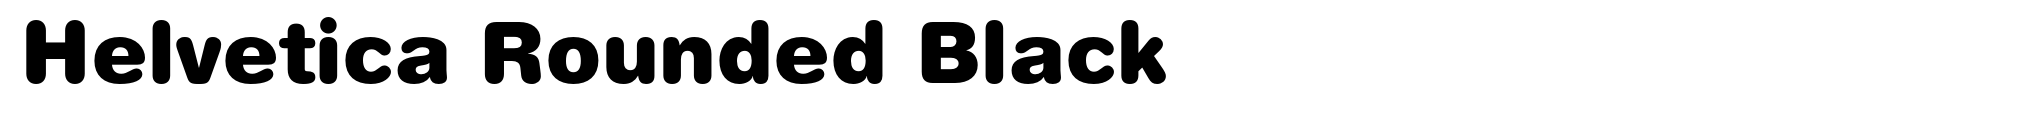 Helvetica Rounded Black image